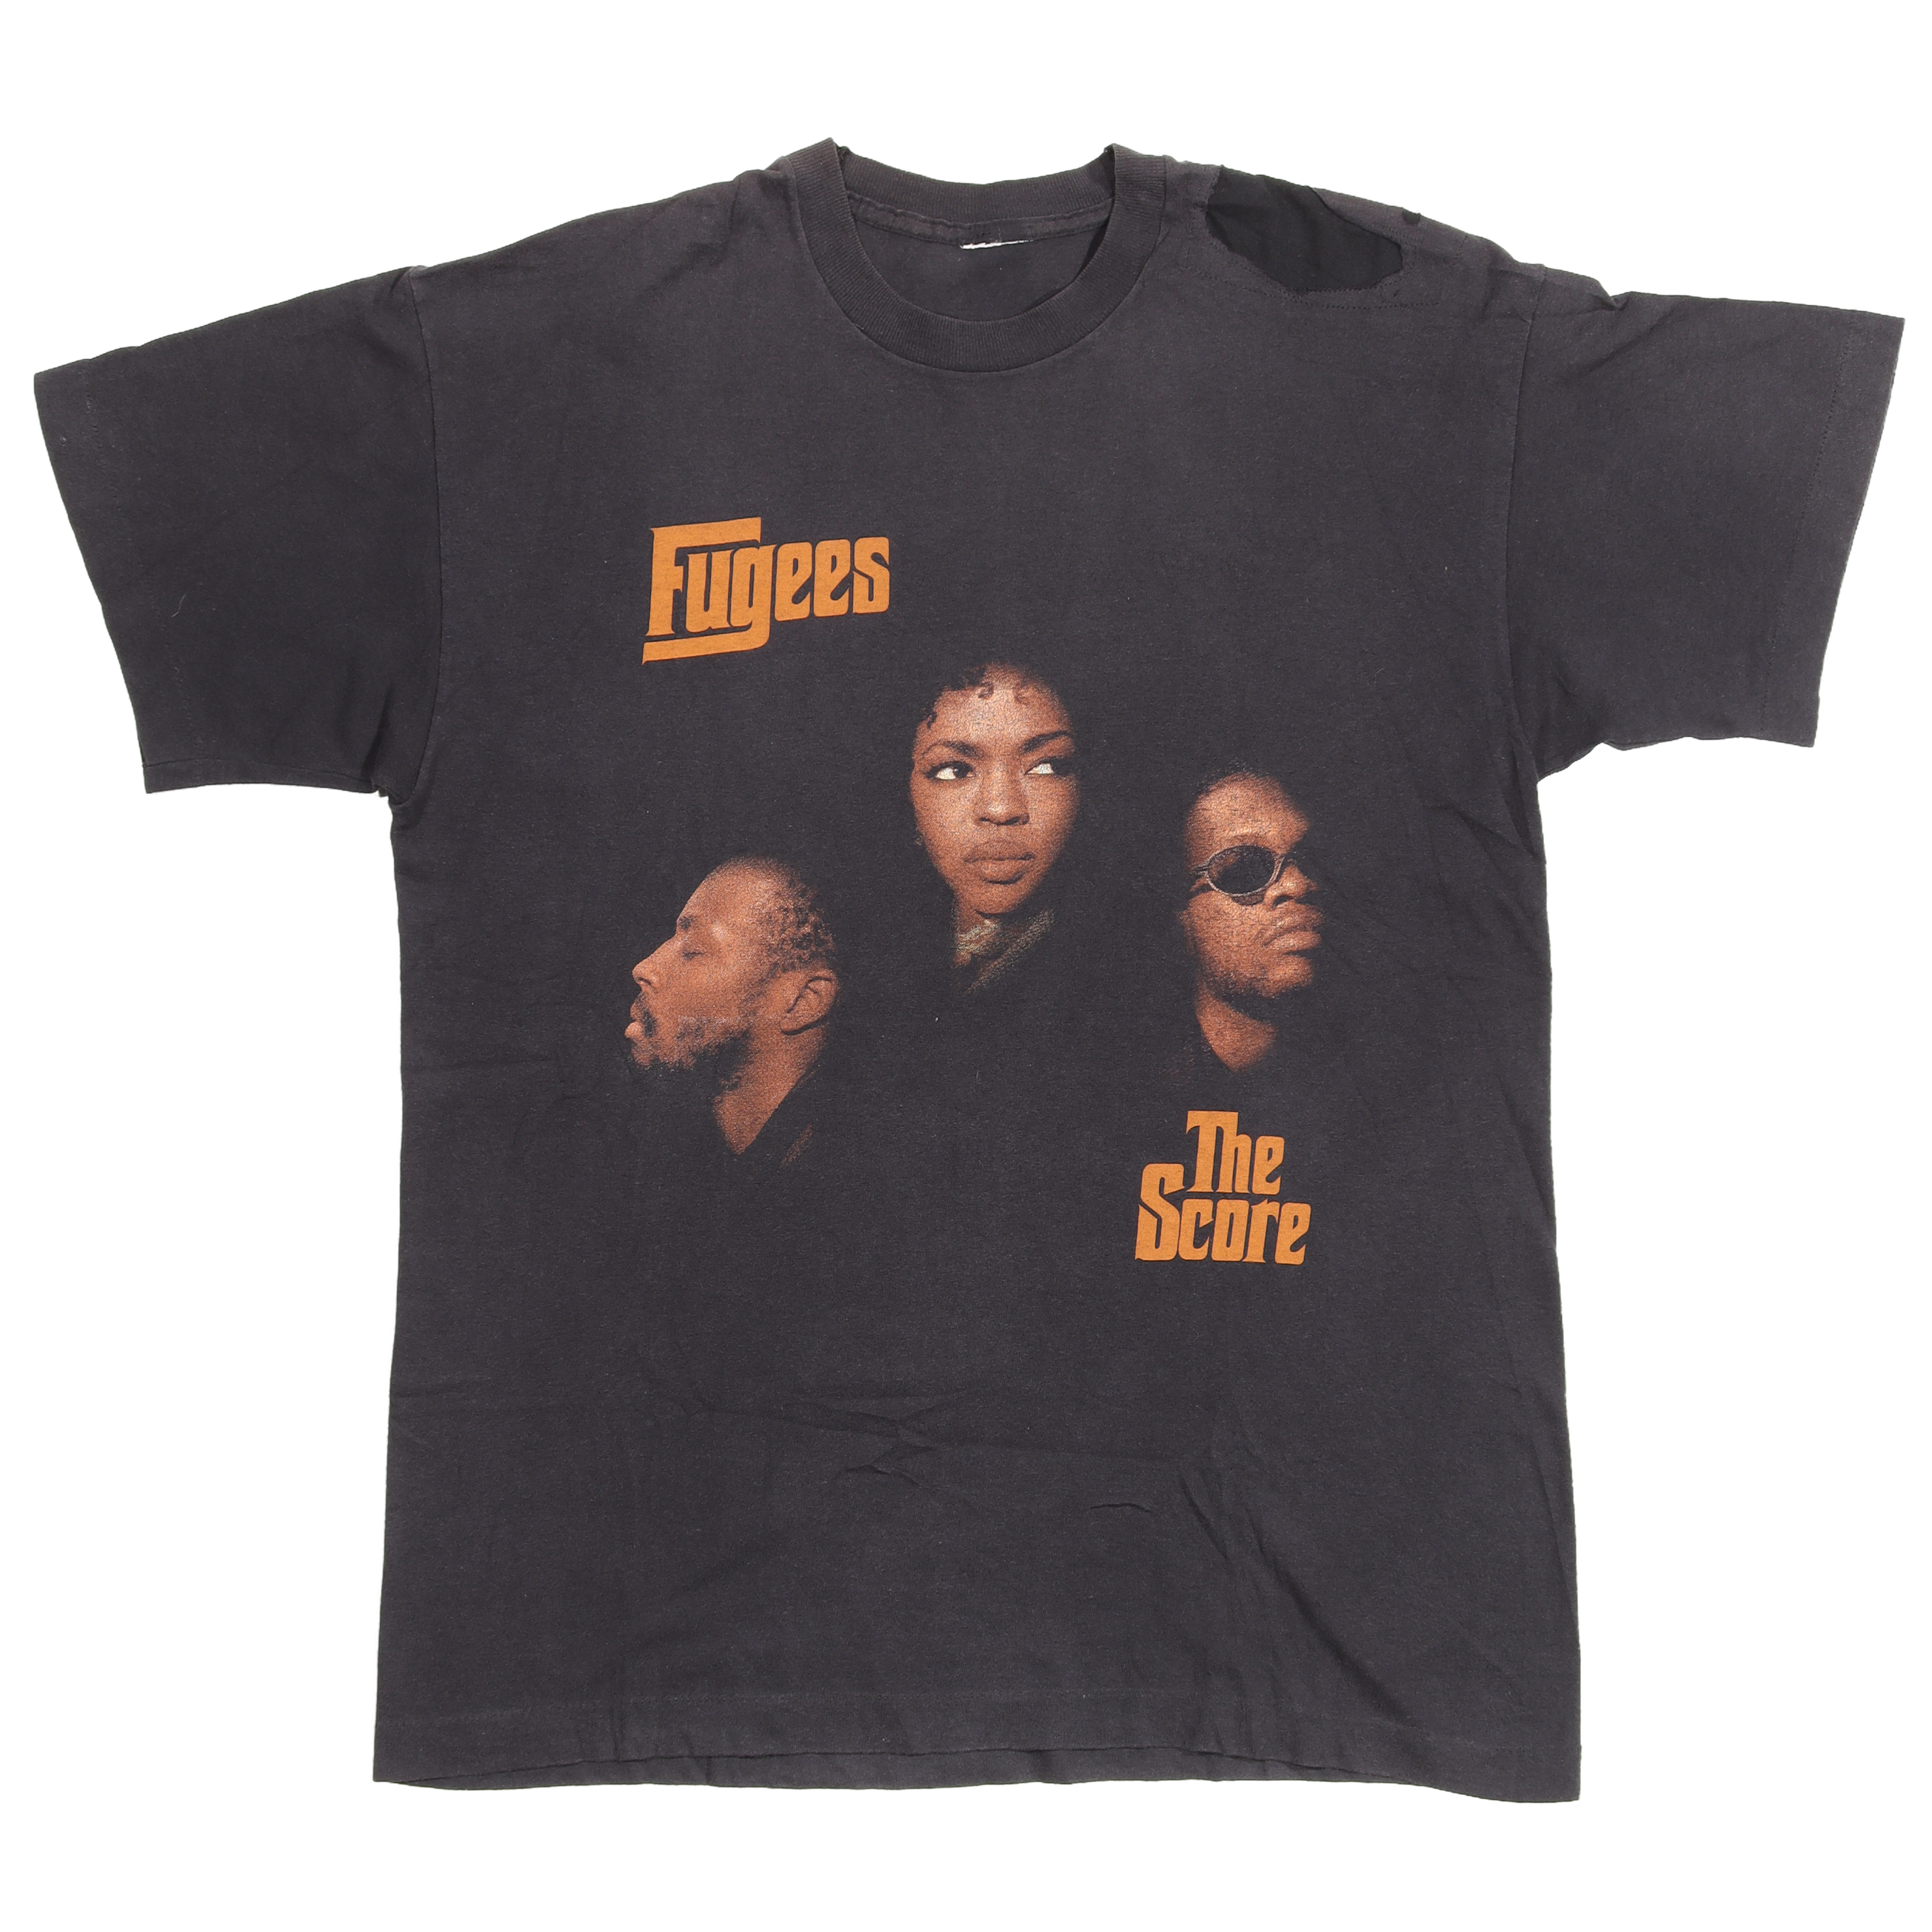 1996 Fugees 'Ready or Not' Tour T-Shirt